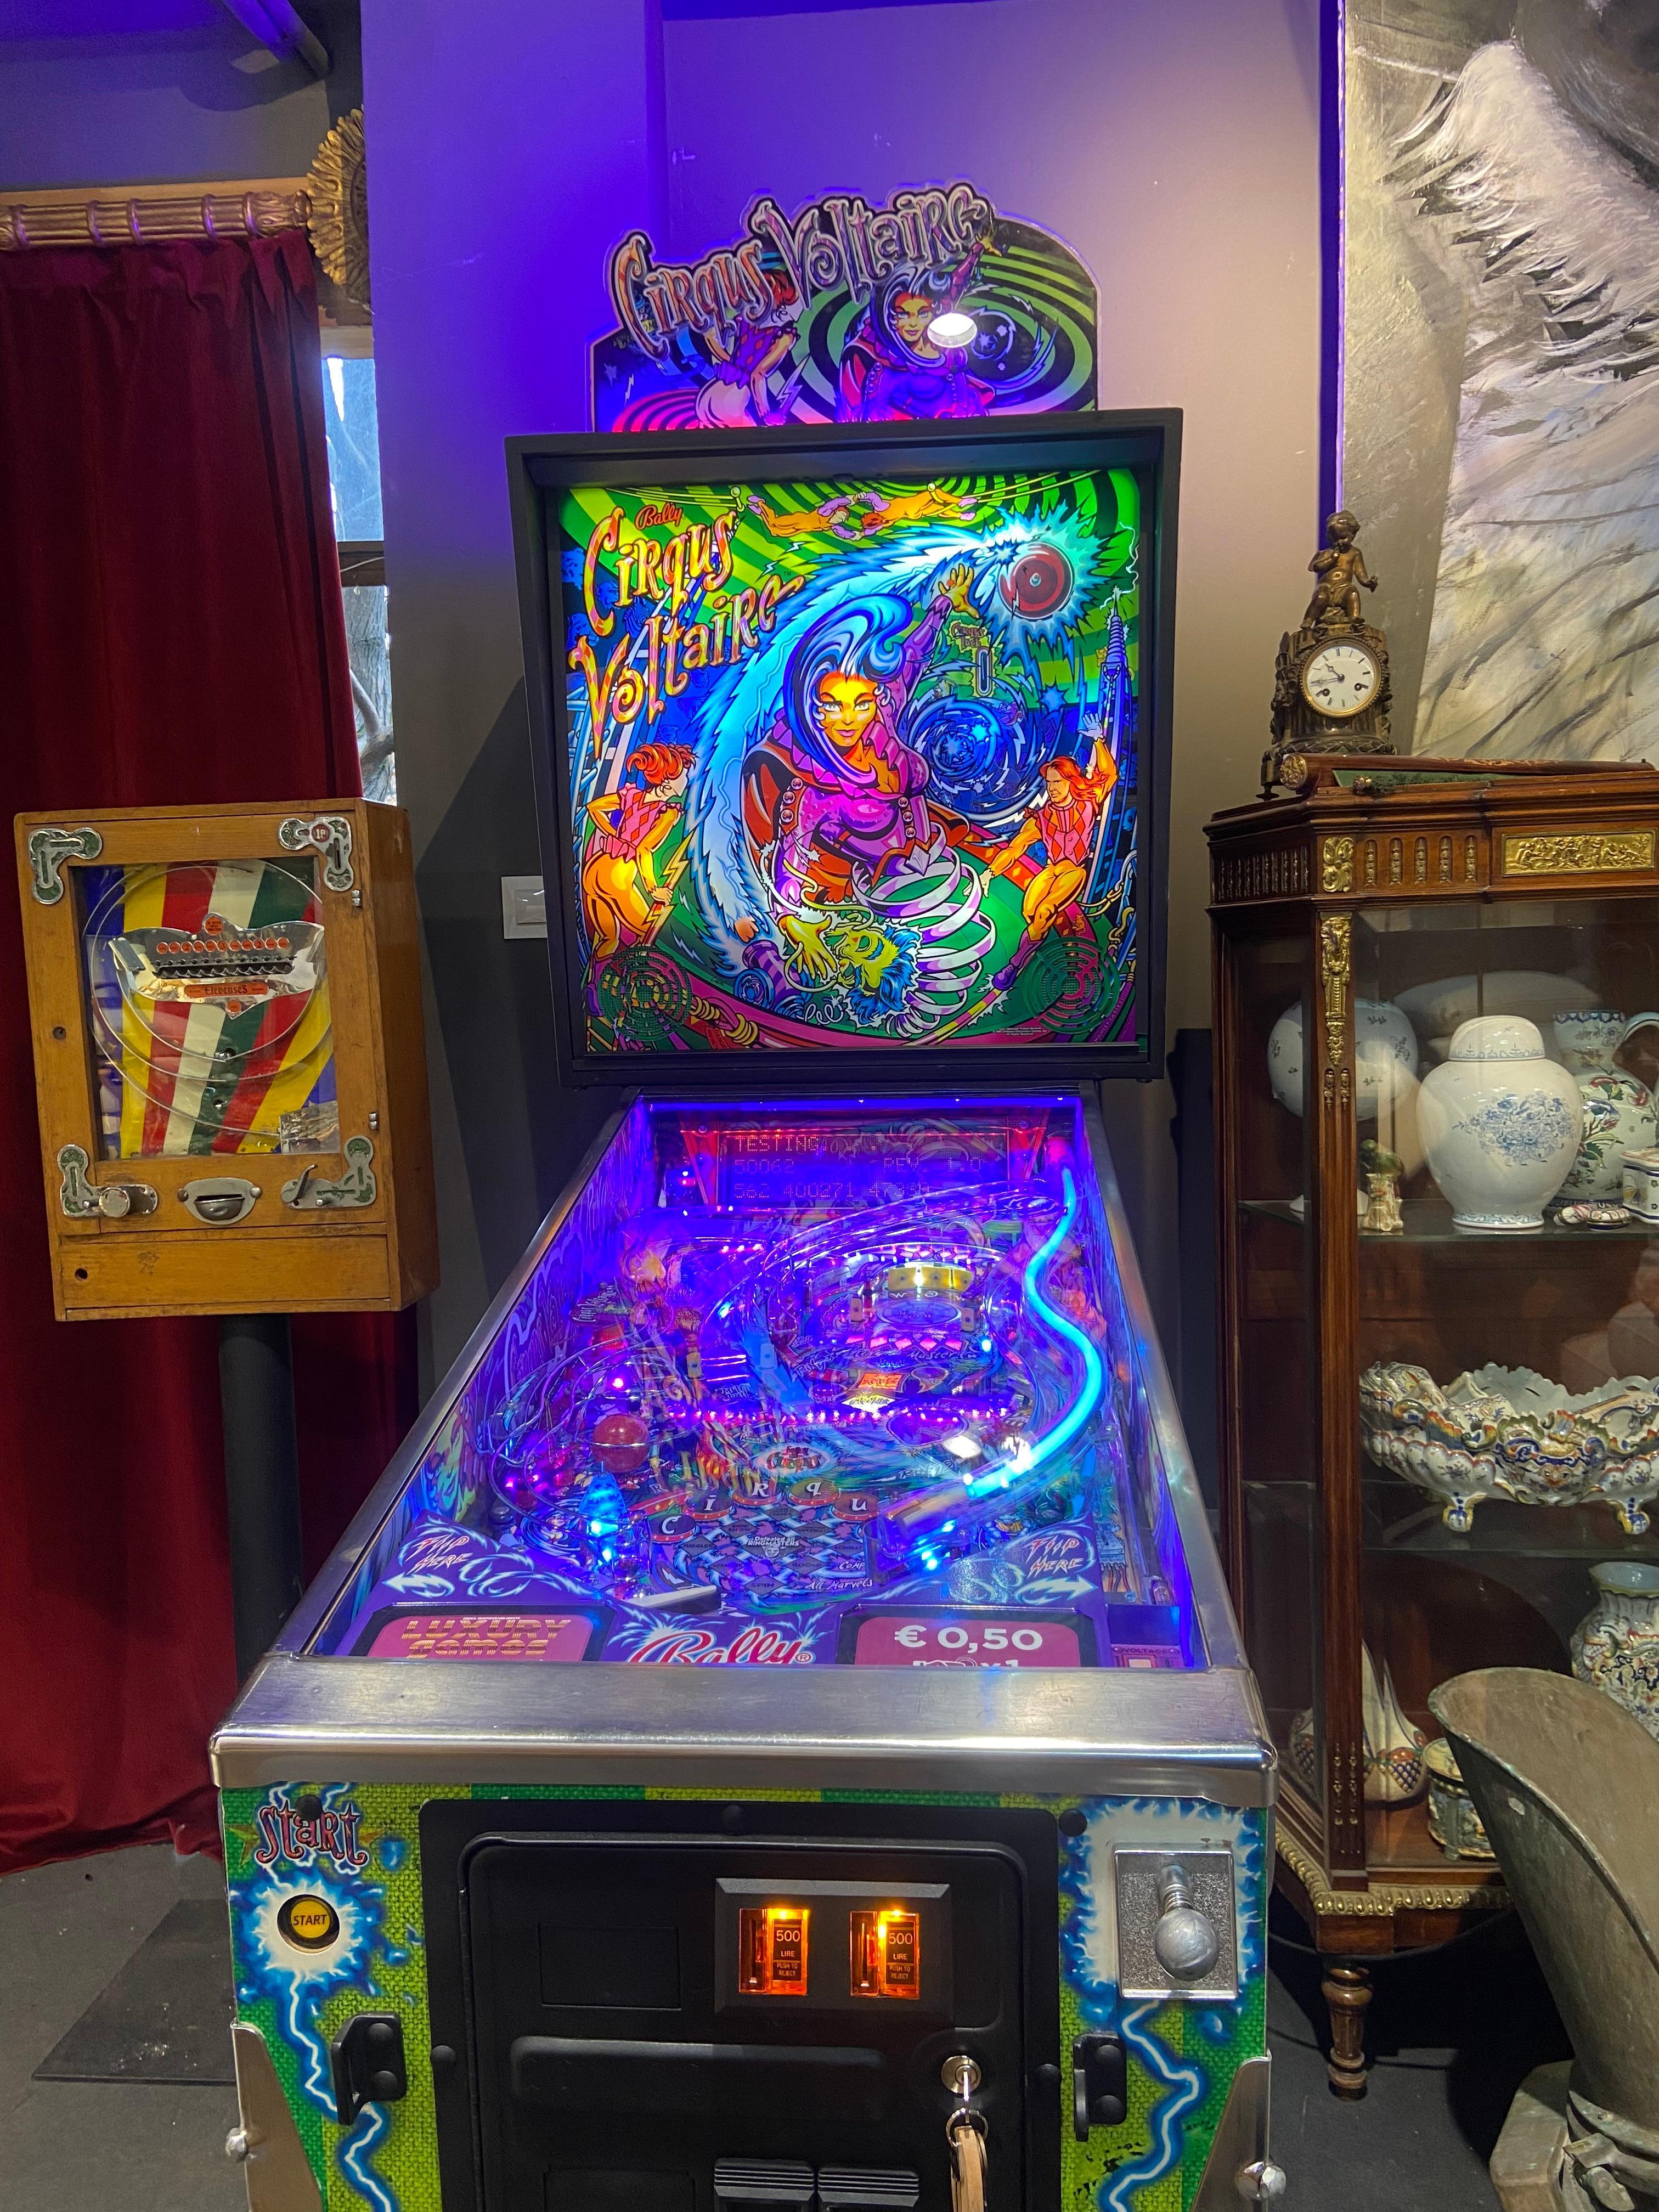 Metal Legendary Circus Voltaire Pinball Game by Williams Electronic Games Made in 1997 For Sale